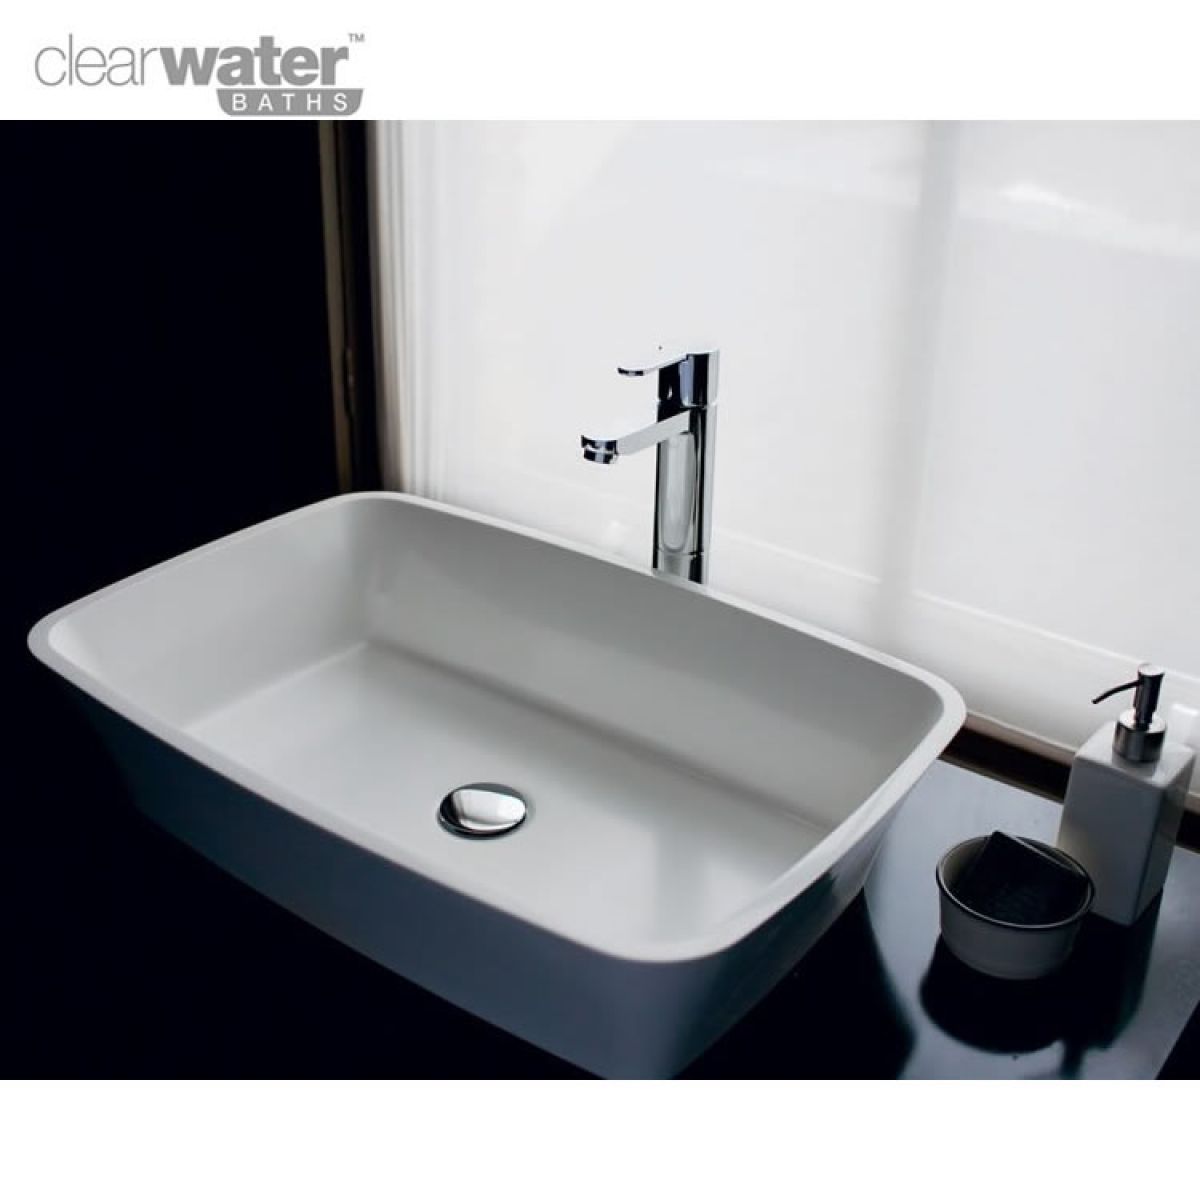 Countertop basin by Clearwater